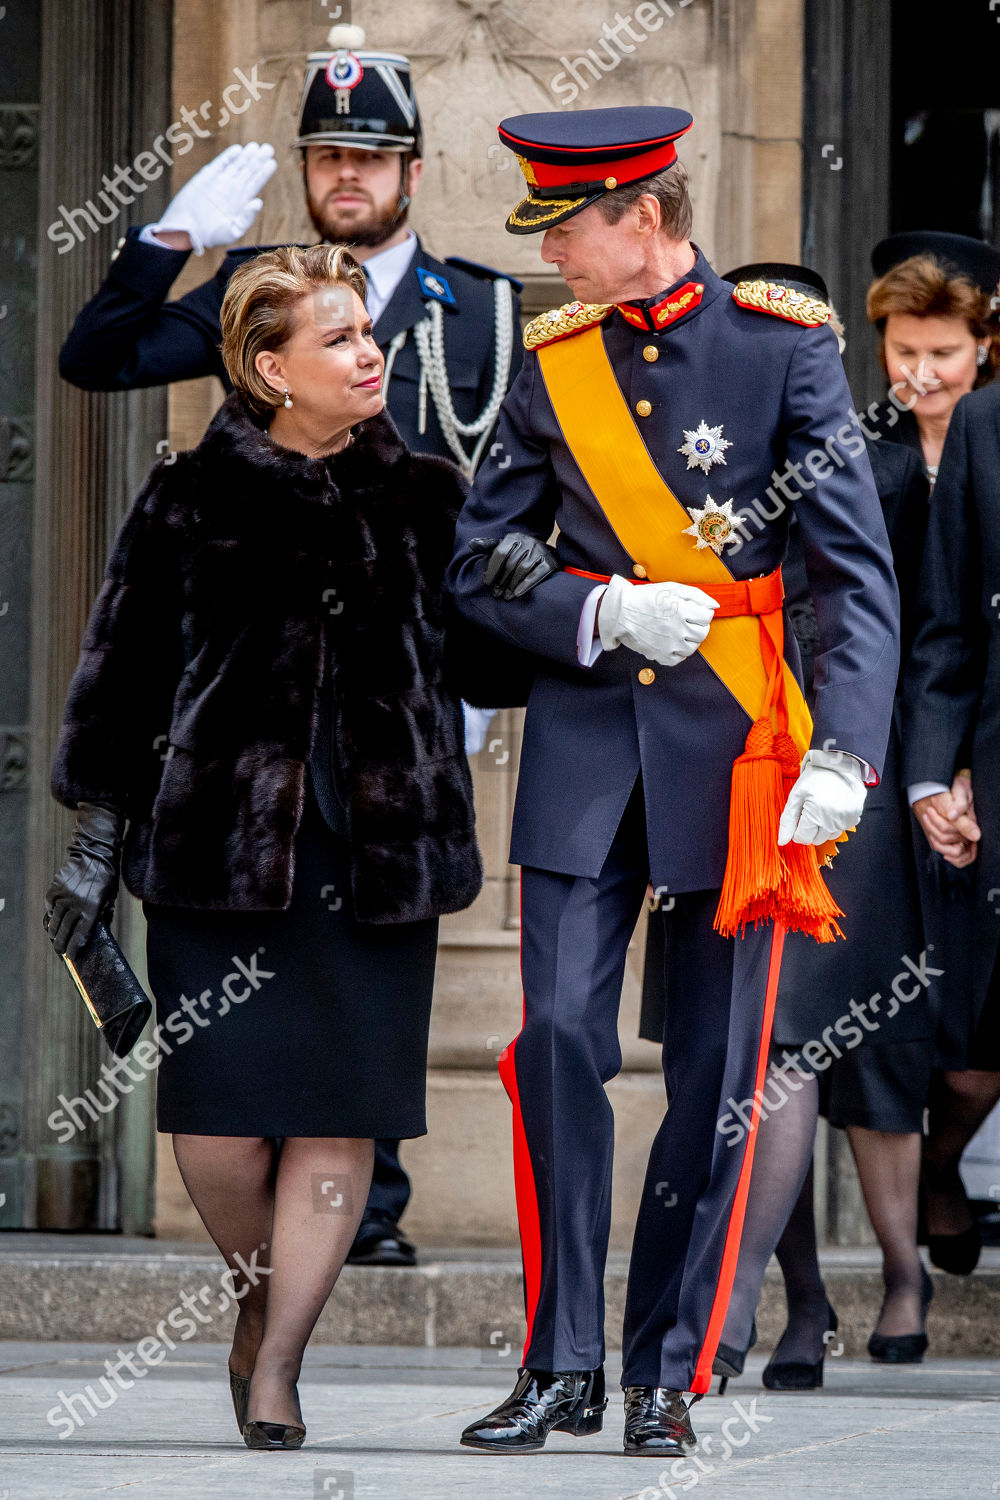 grand-duke-jean-funeral-cathedral-notre-dame-luxembourg-shutterstock-editorial-10228100cw.jpg